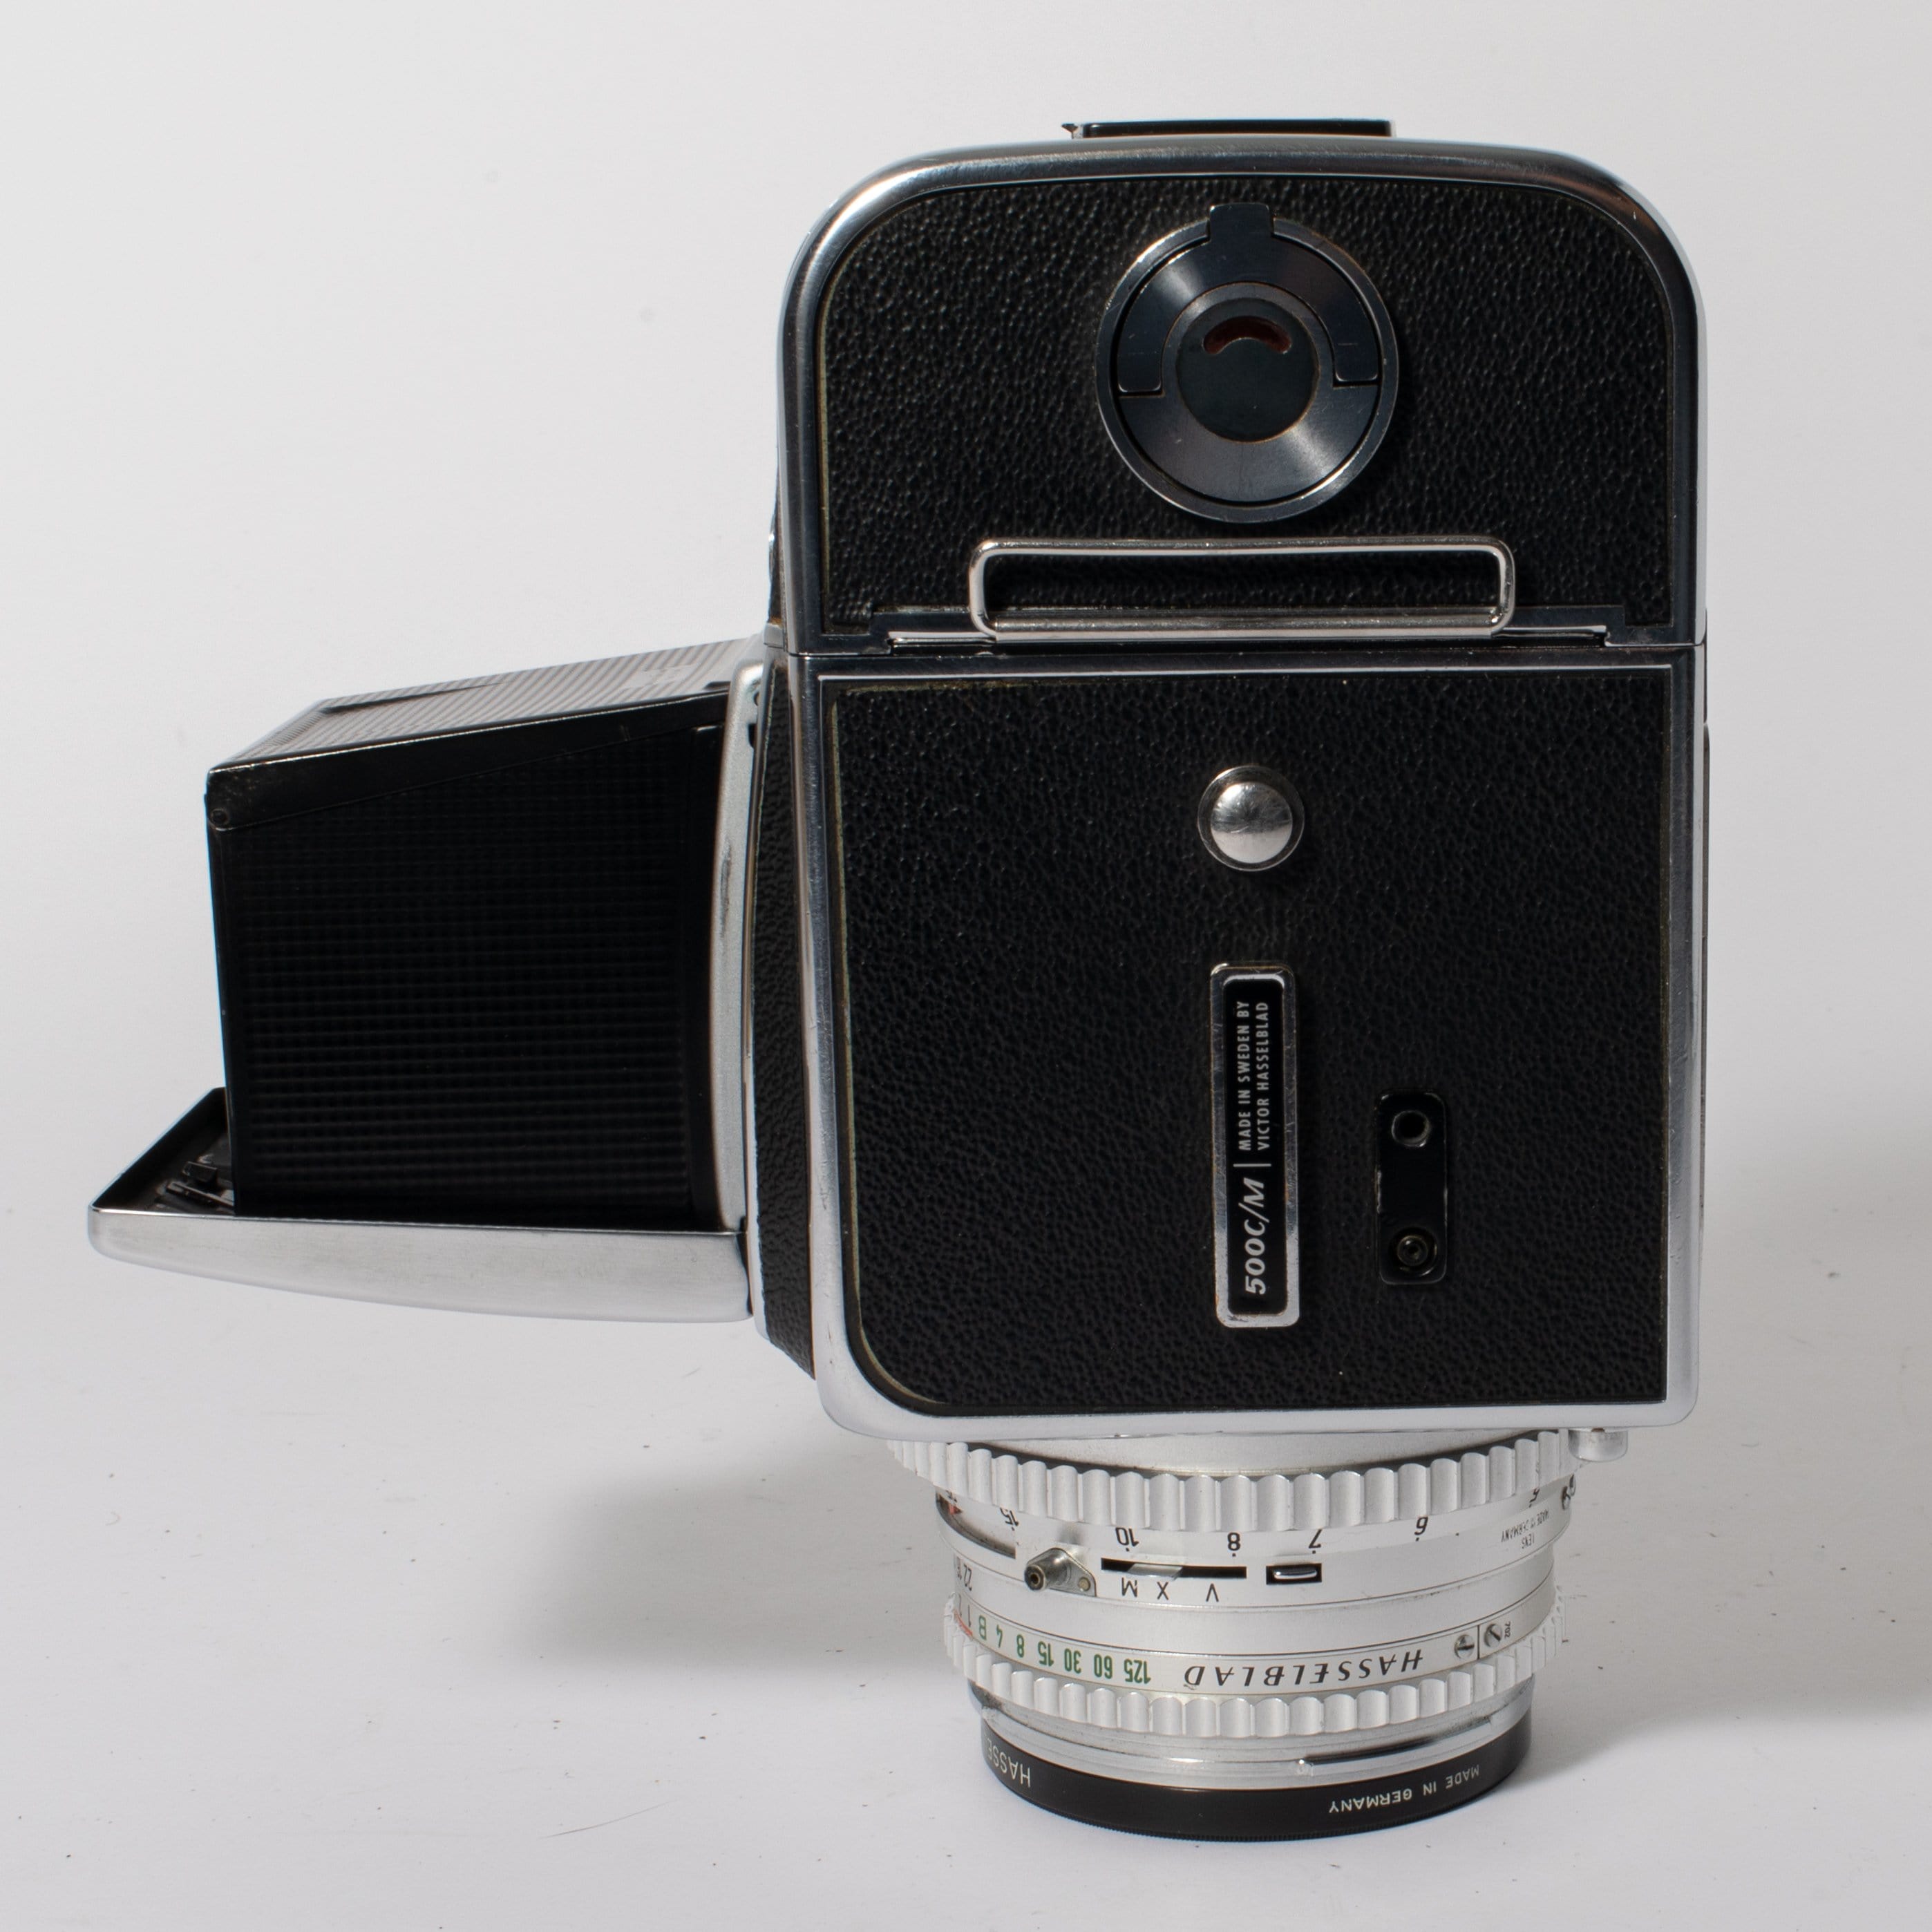 Hasselblad 500 C/M with Zeiss Planar 80mm f/2.8 Lens Kit – Film 